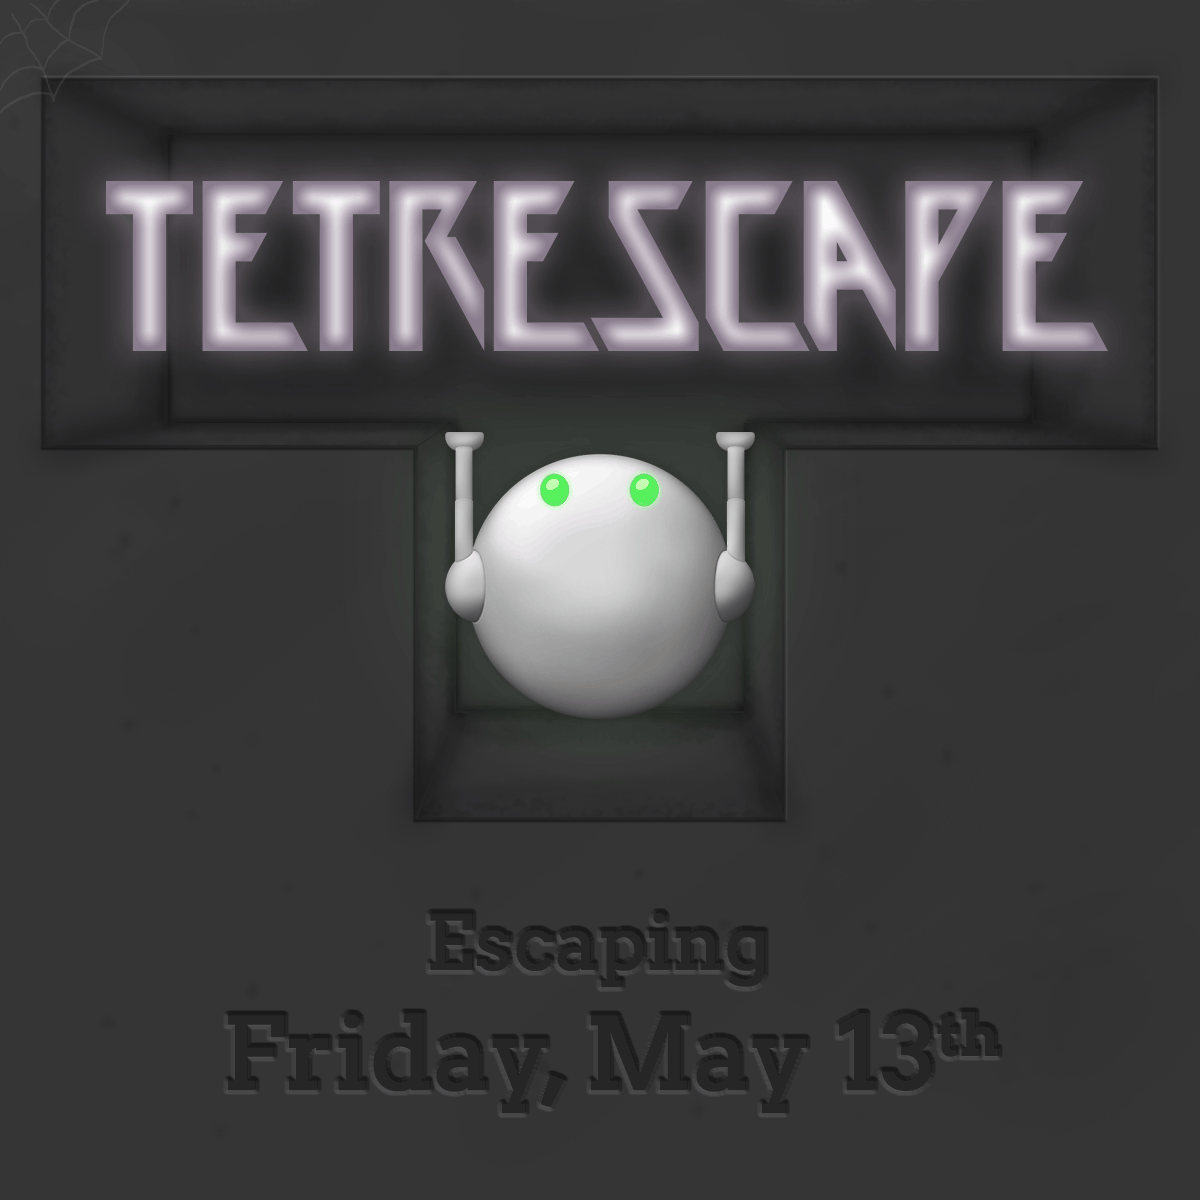 TetrEscape.  Escaping Friday, May thirteenth.